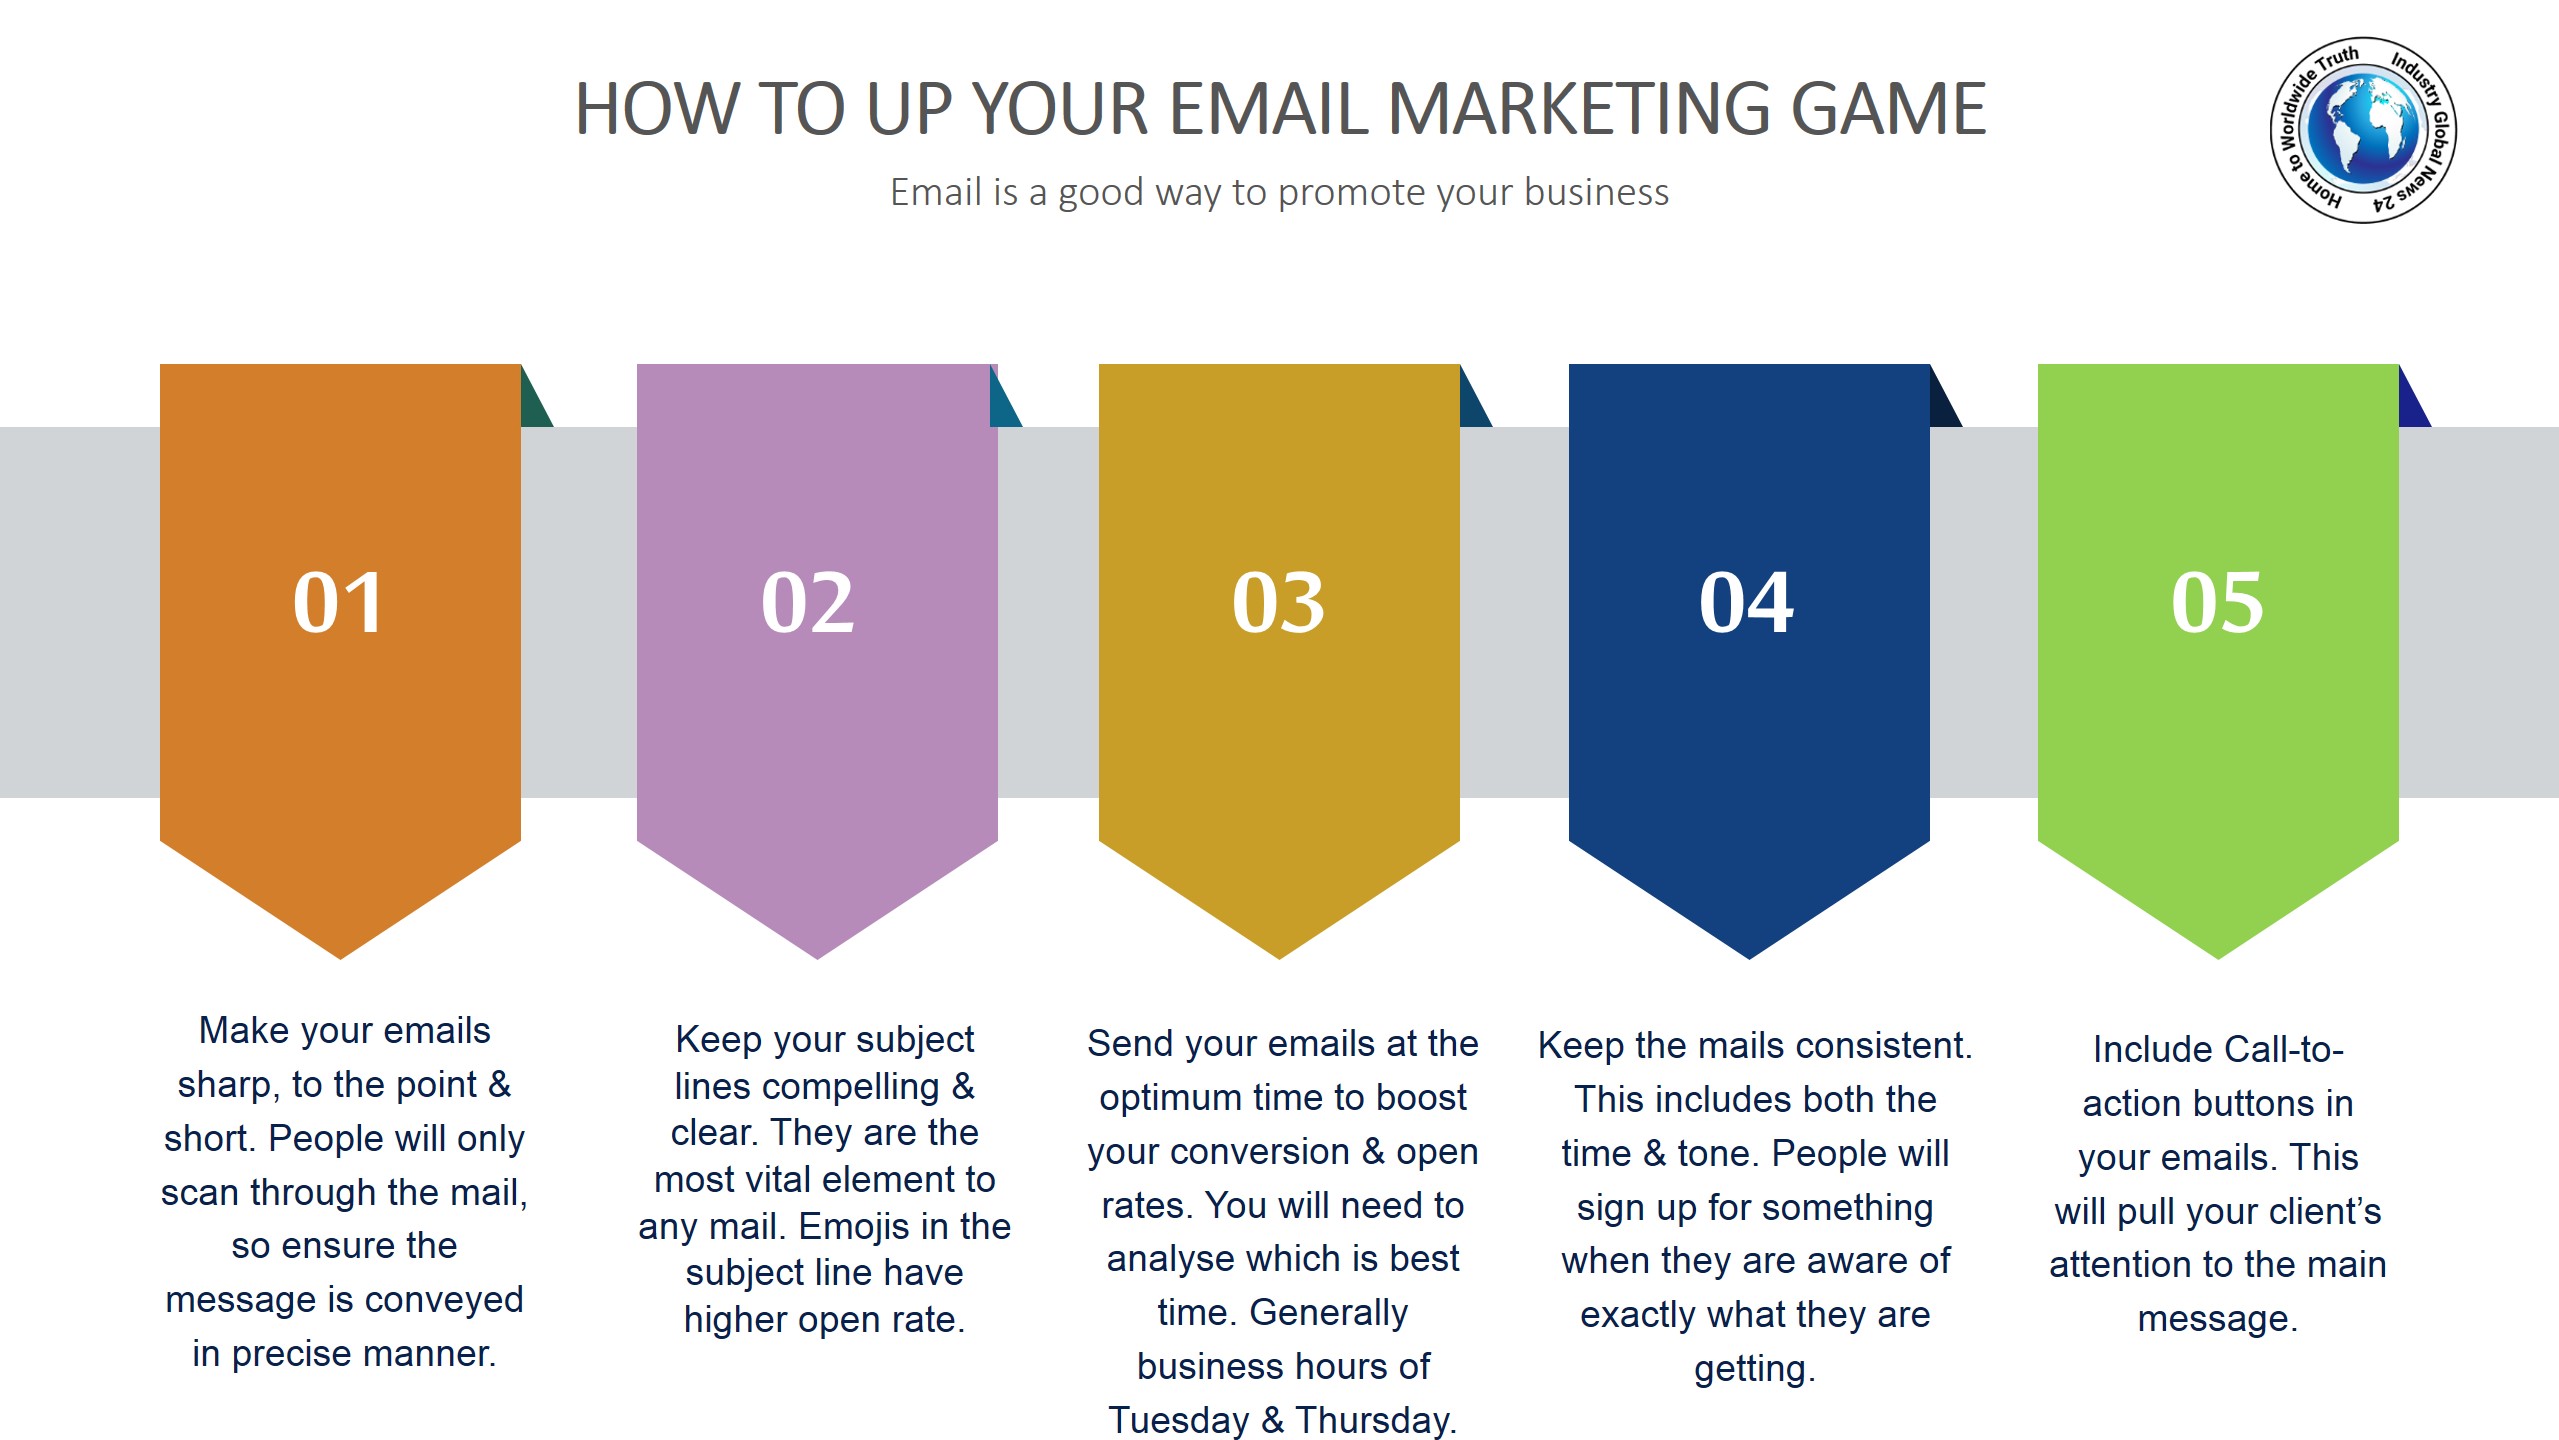 How to up your email marketing game